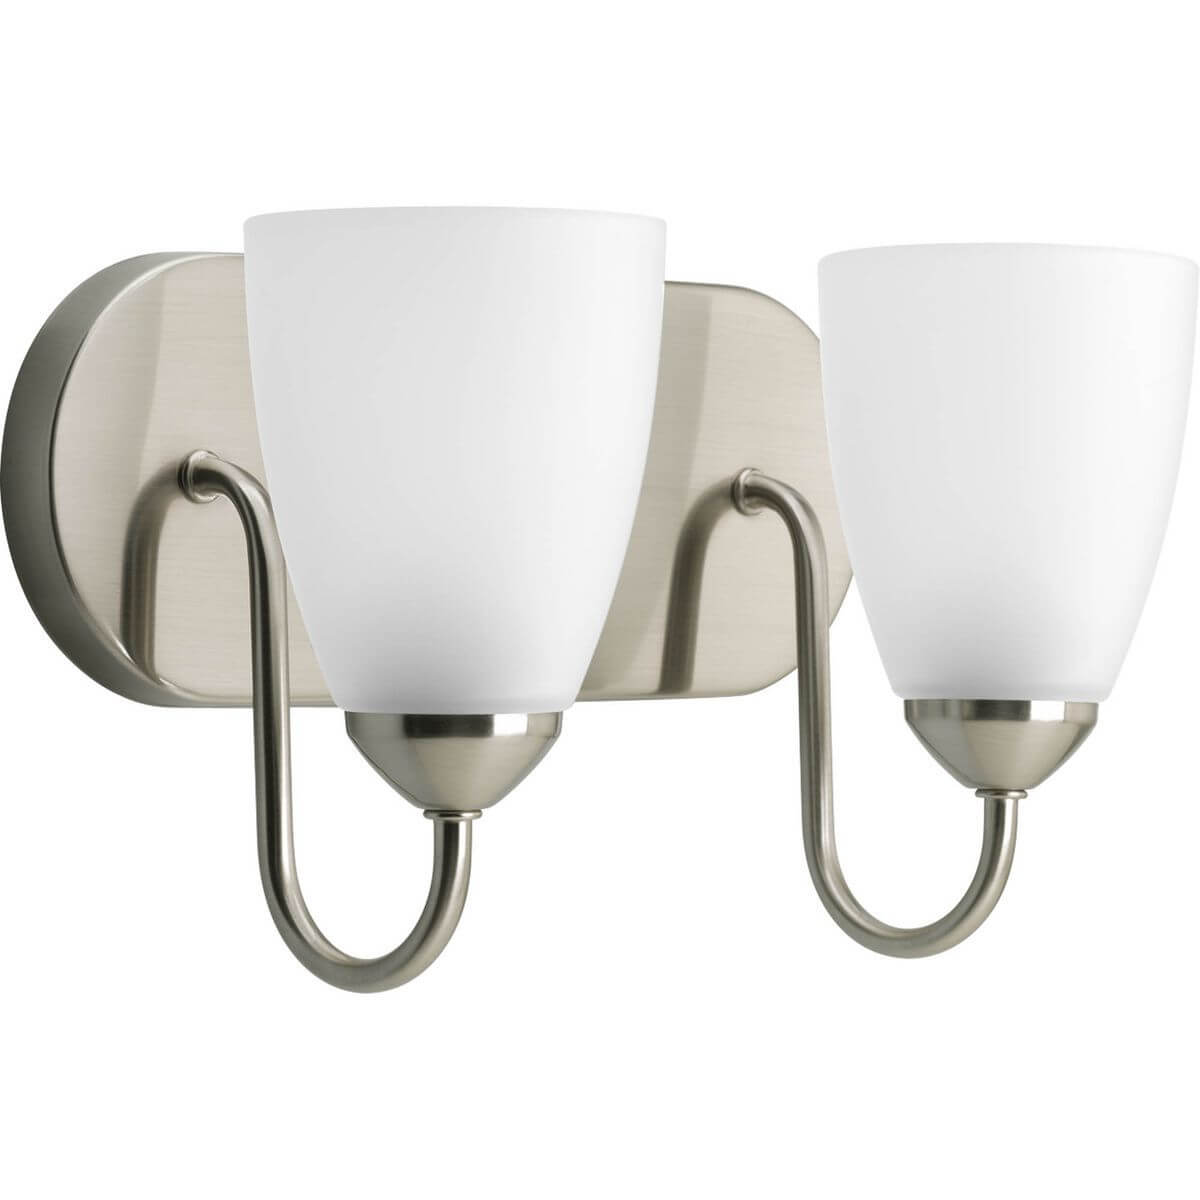 Progress Lighting Gather 2 Light 12 inch Bath Vanity Light in Brushed Nickel with Etched Glass P2707-09